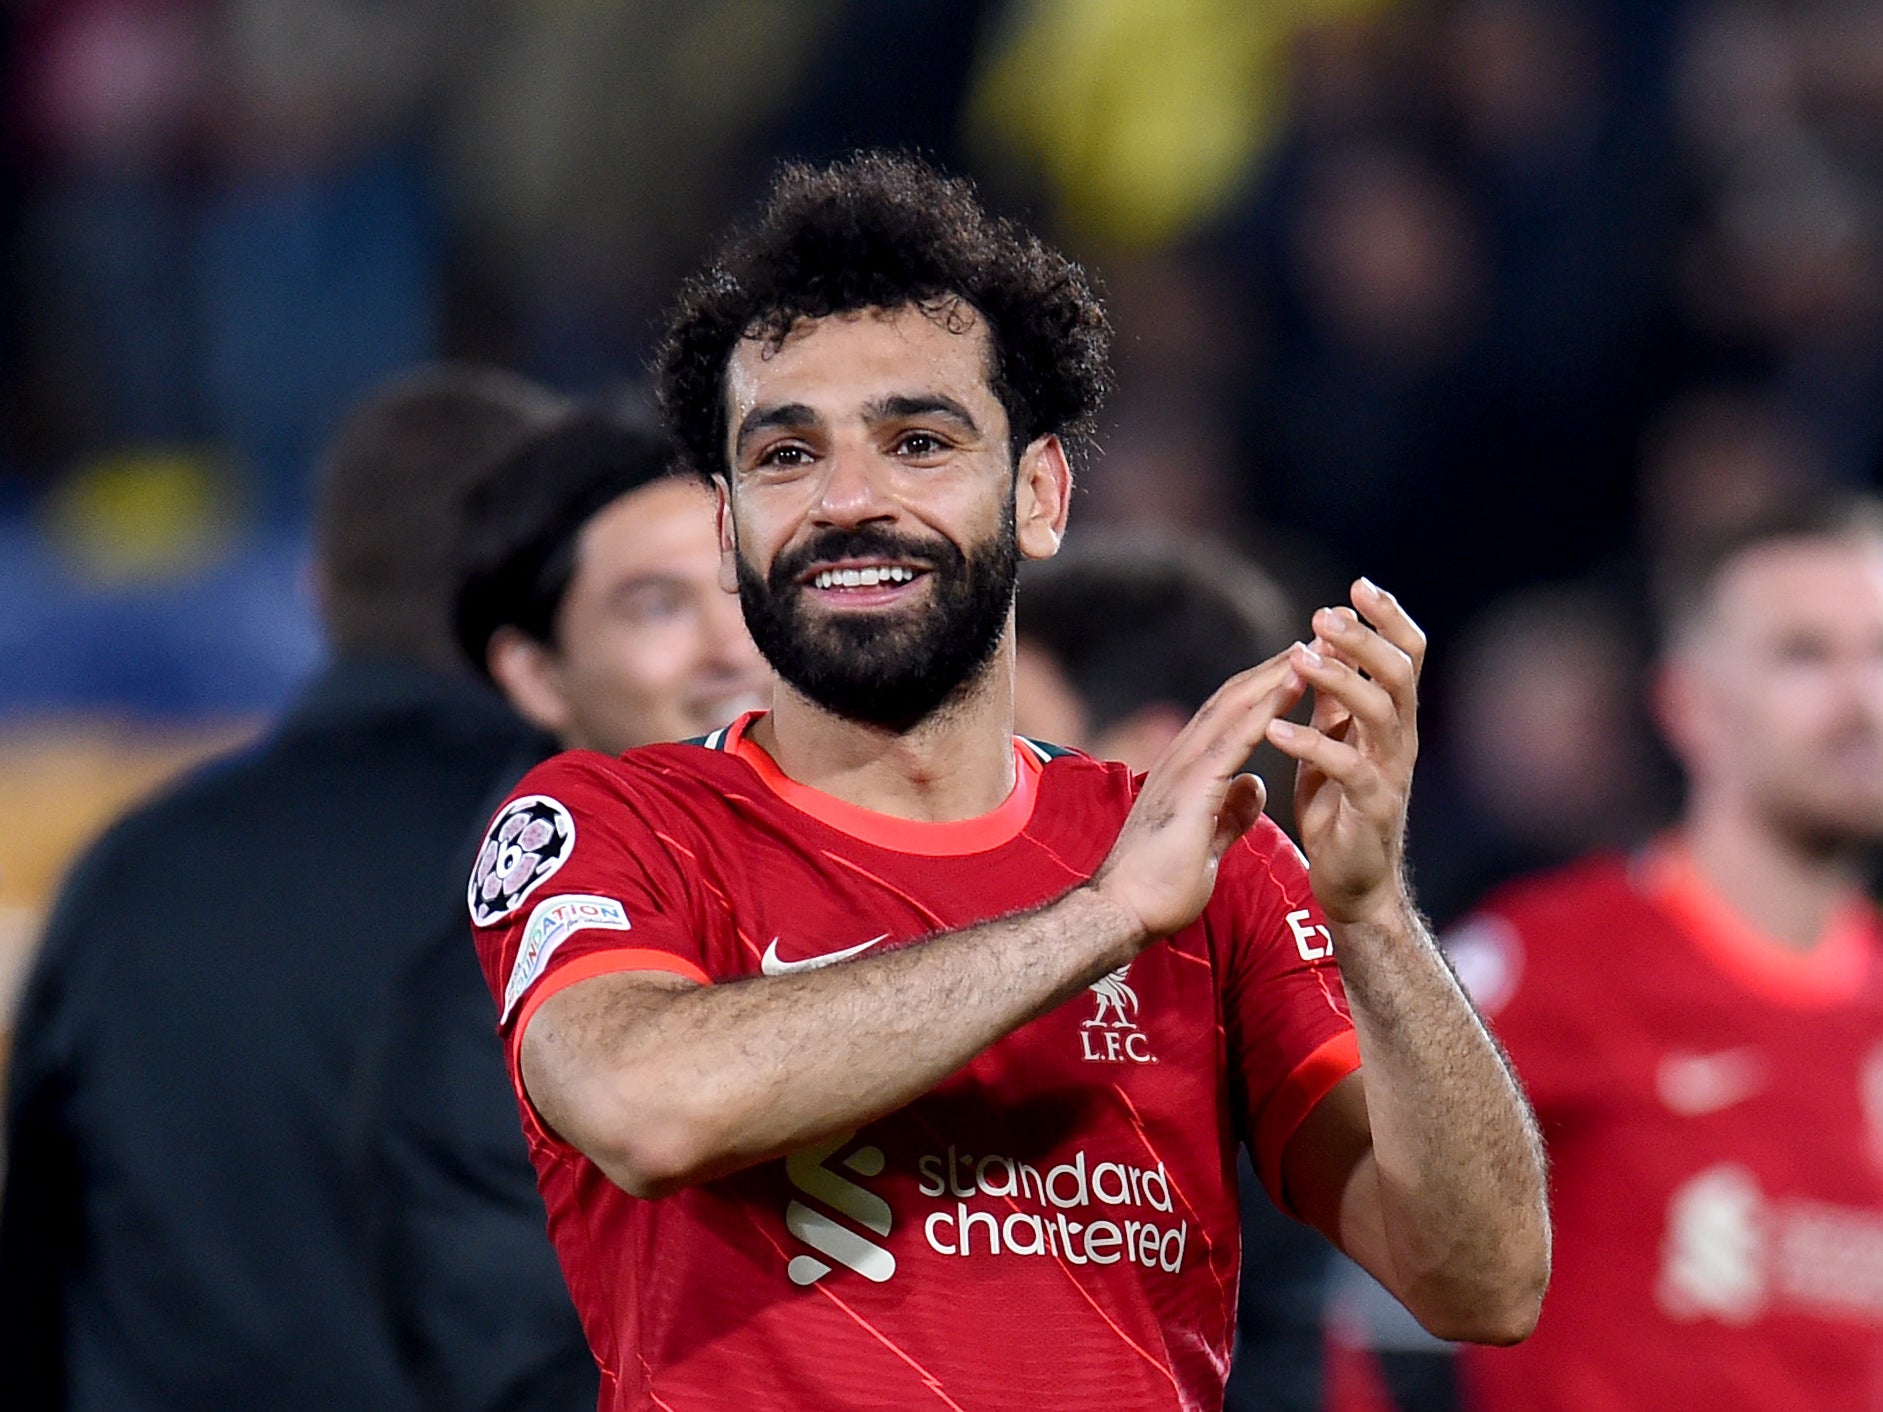 If it was not for Lionel Messi, Mohamed Salah would have gone beyond the best right-winger in the world debates long back.